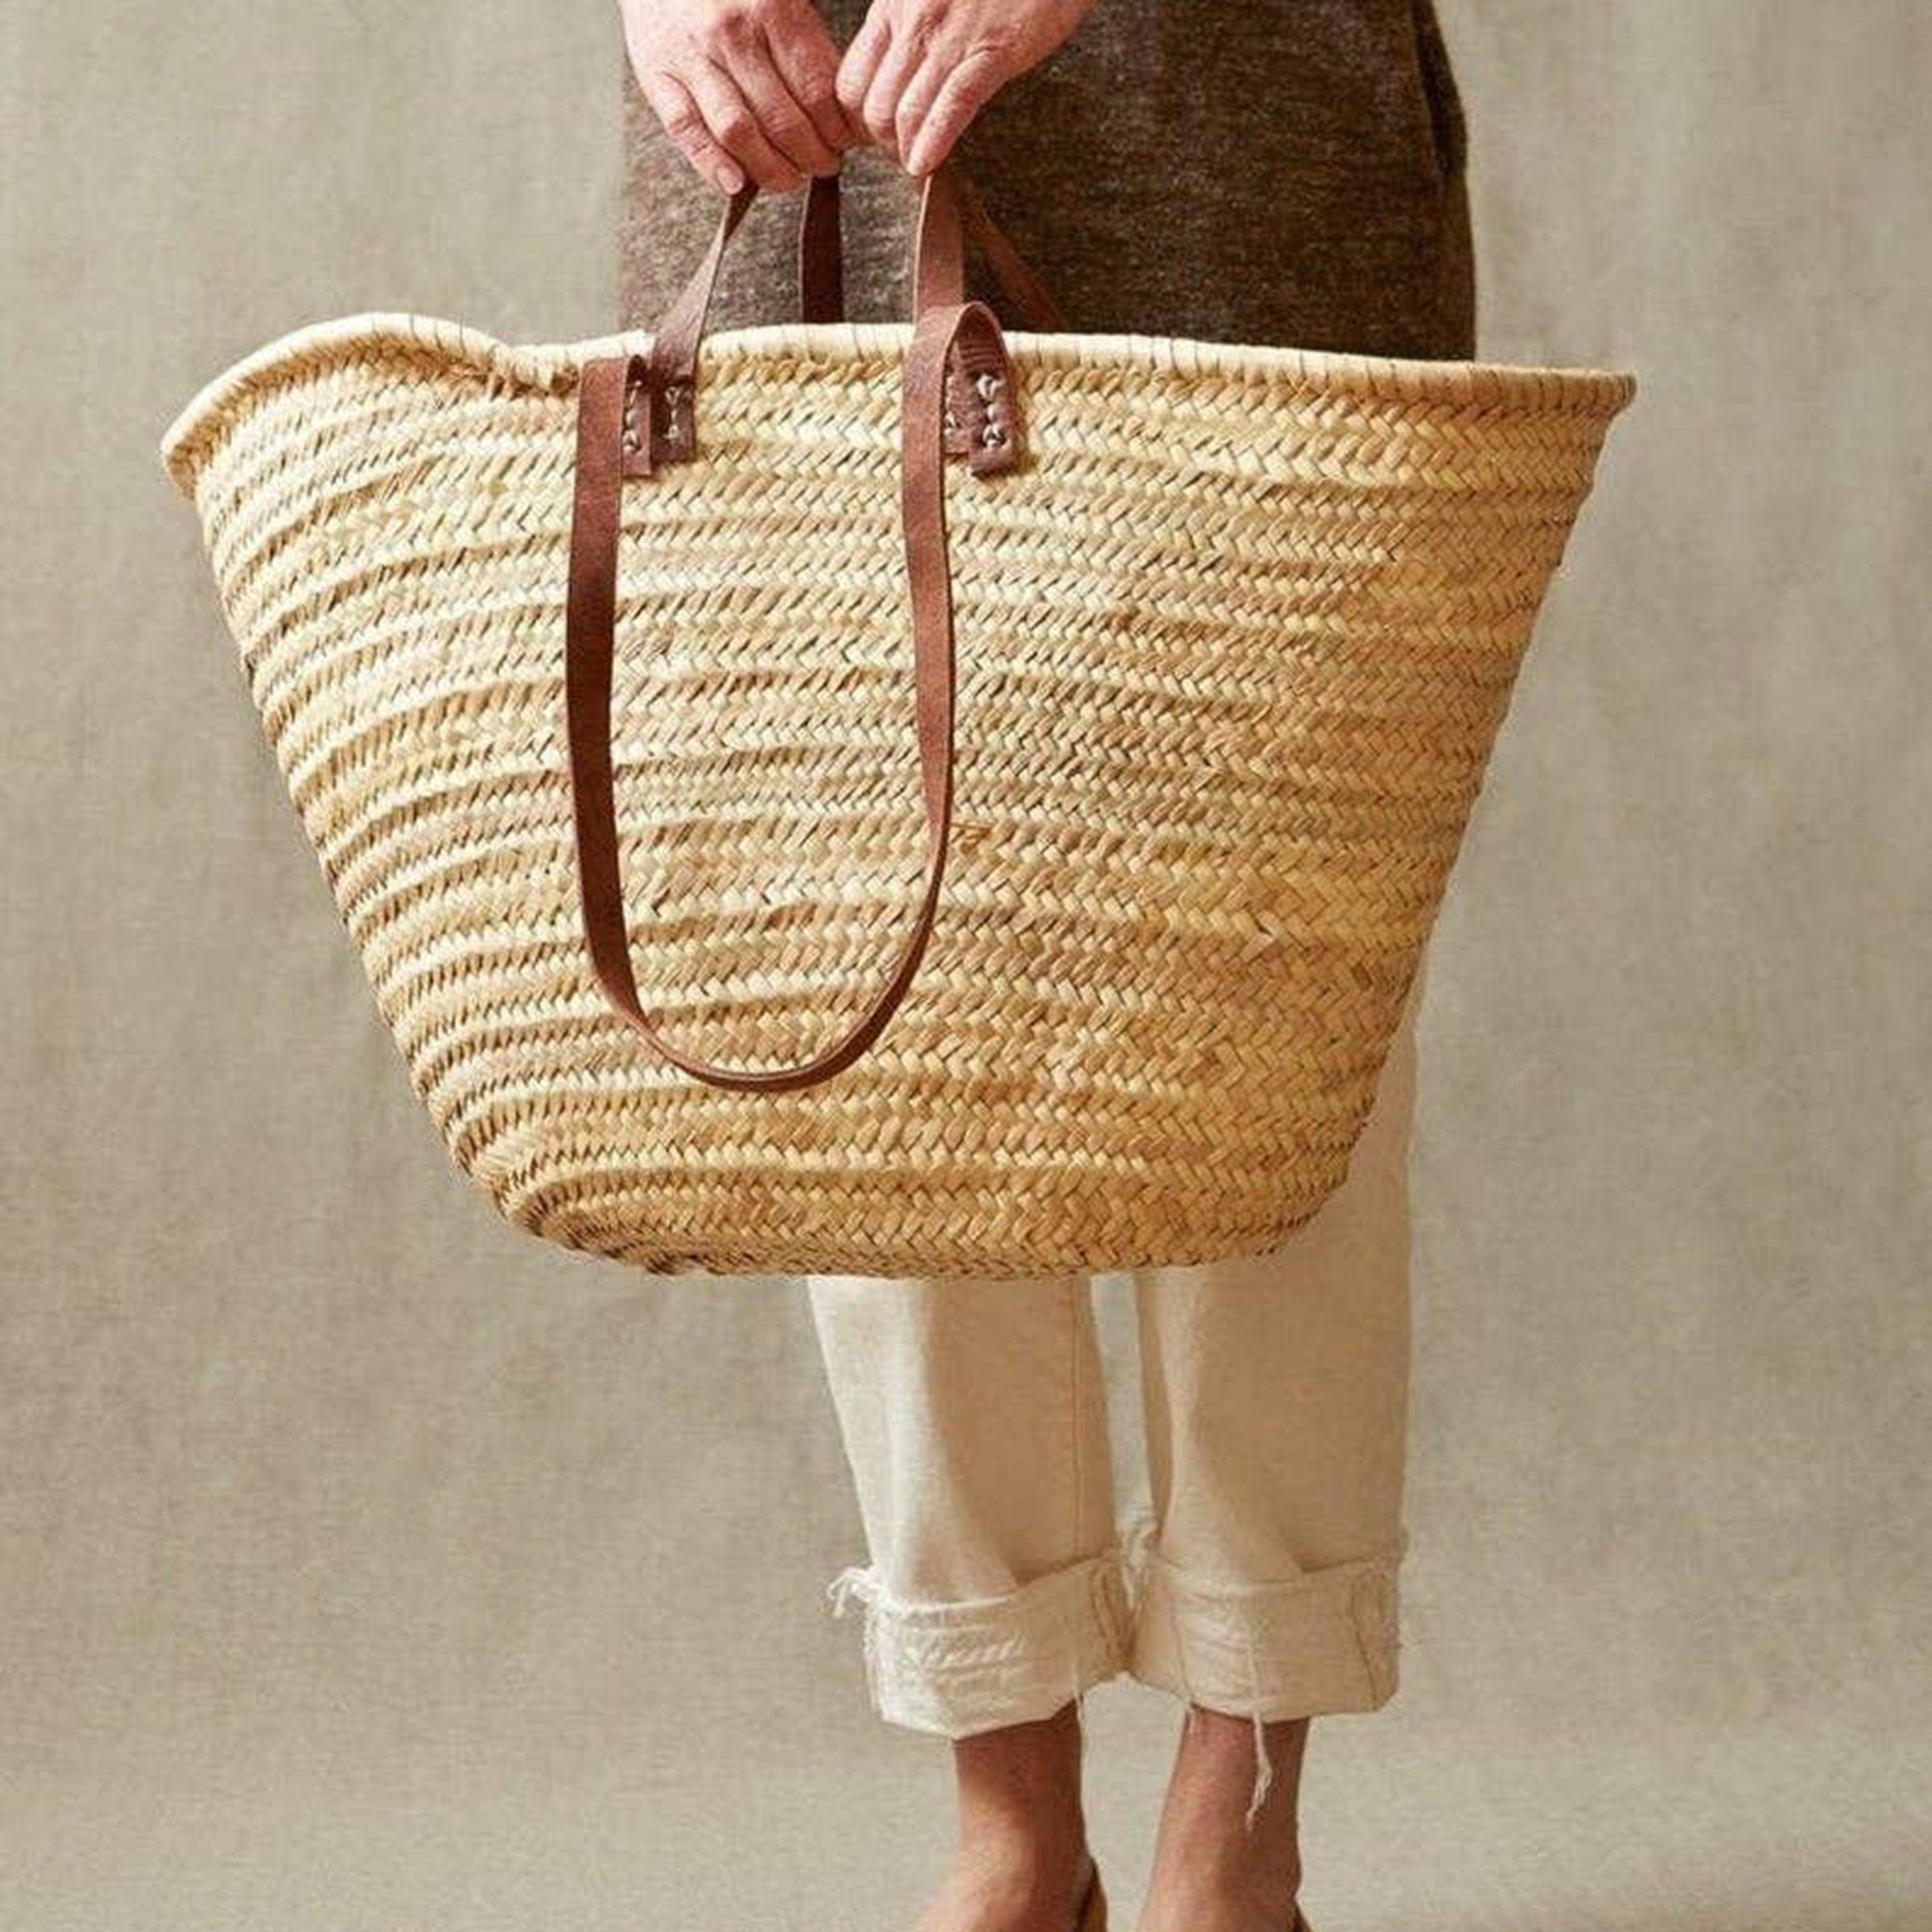 Handmade French Market Basket with Double Leather Handles – Asher